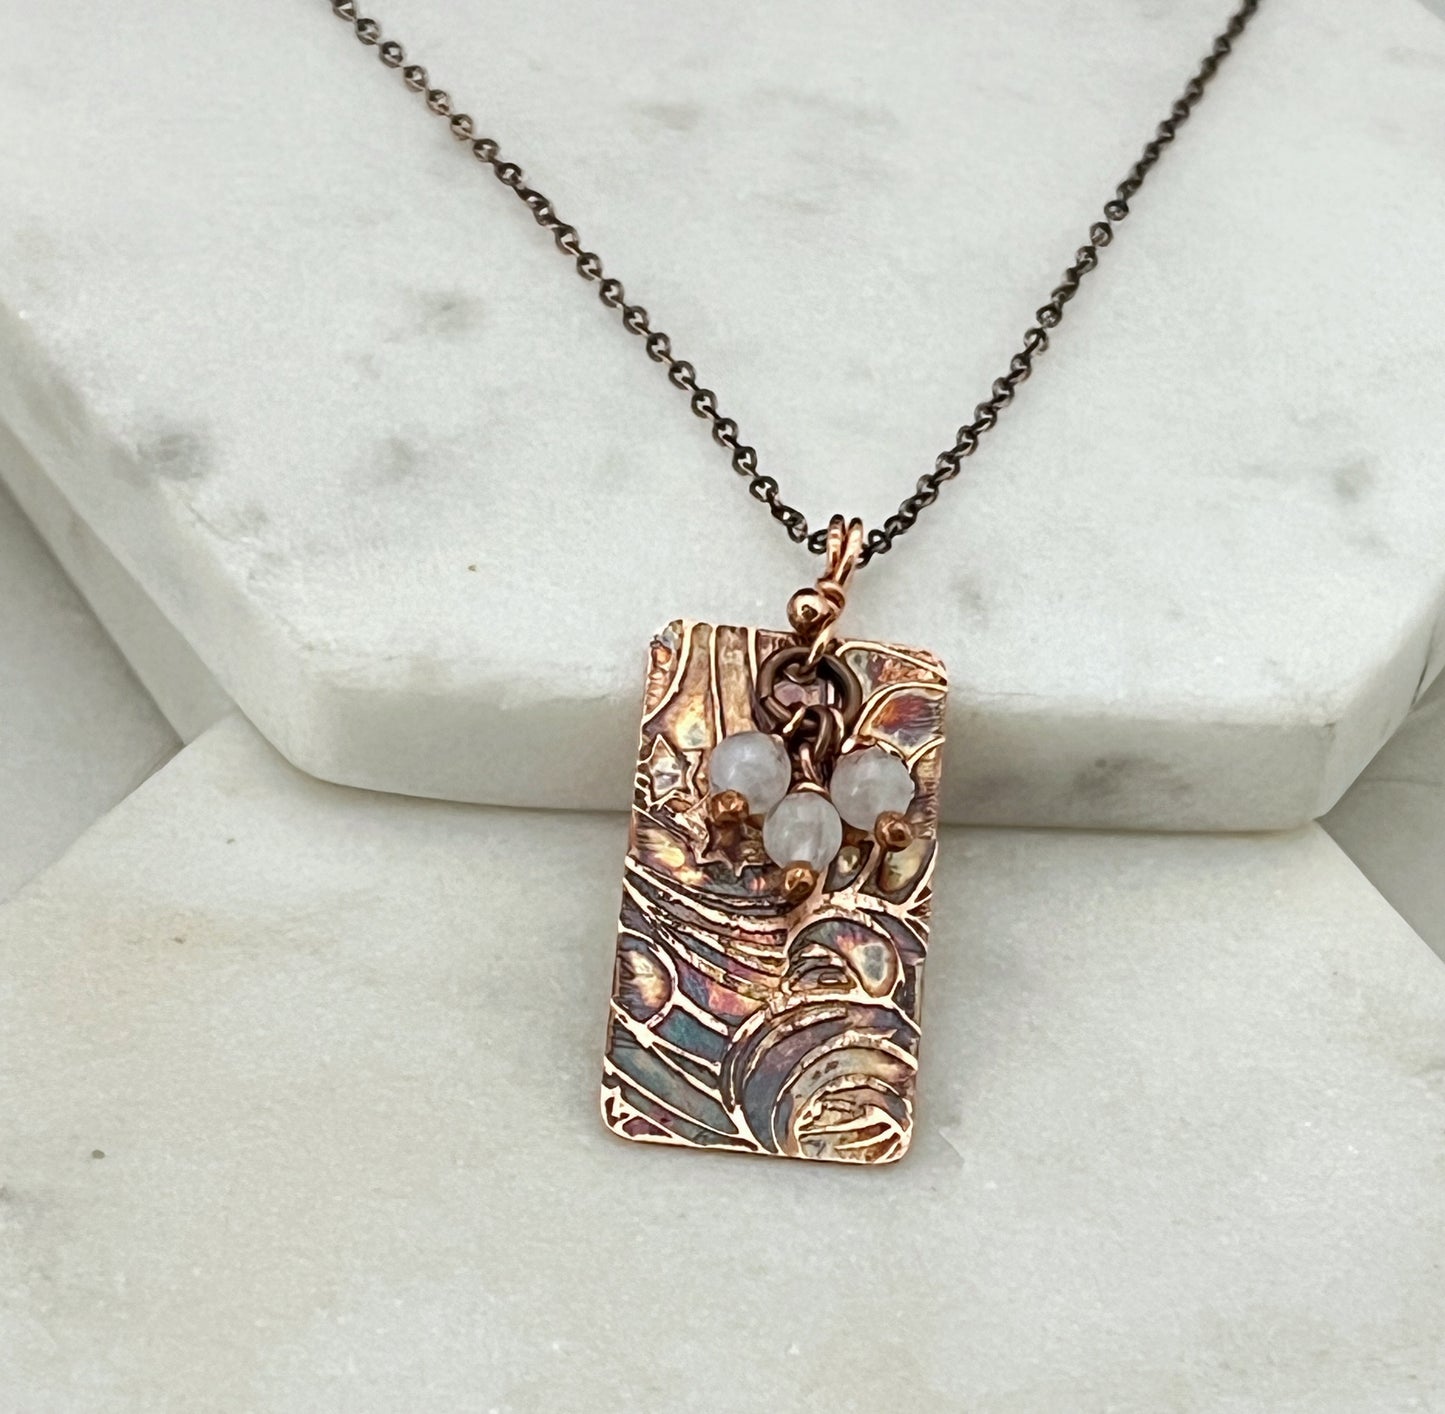 Acid etched copper and moonstone necklace